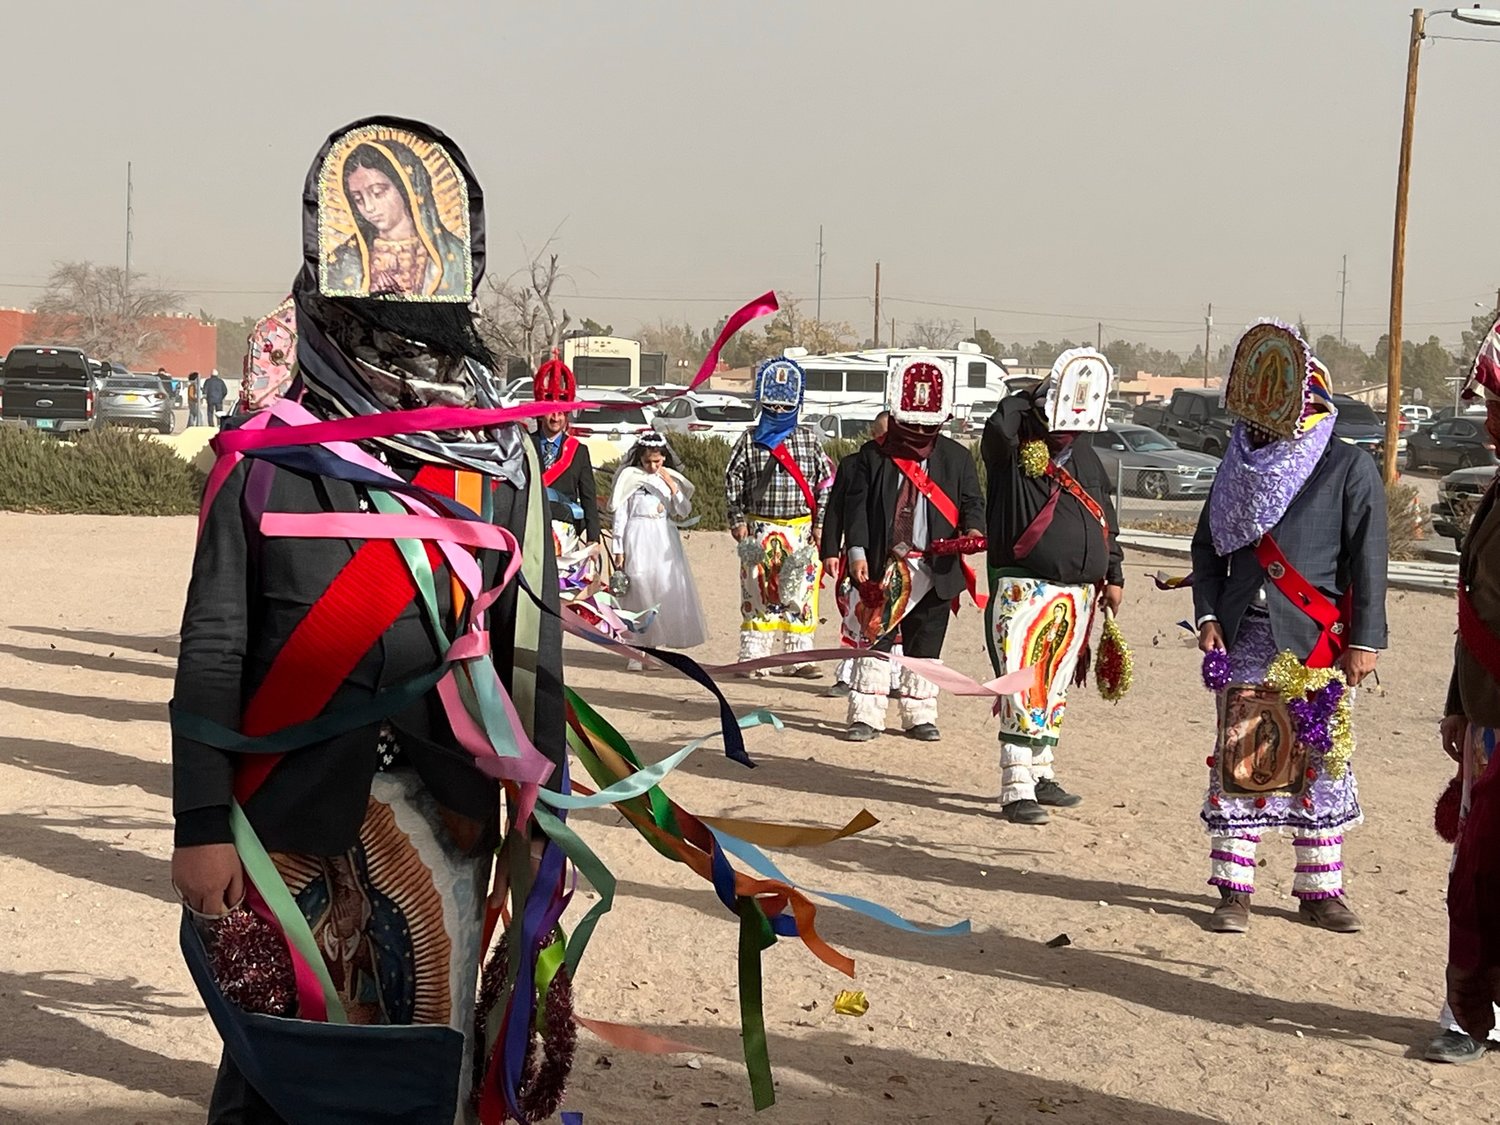 Danzantes at Tortugas Pueblo celebrate Our Lady of Guadalupe on Monday, Dec. 12, the last day of the feast days.